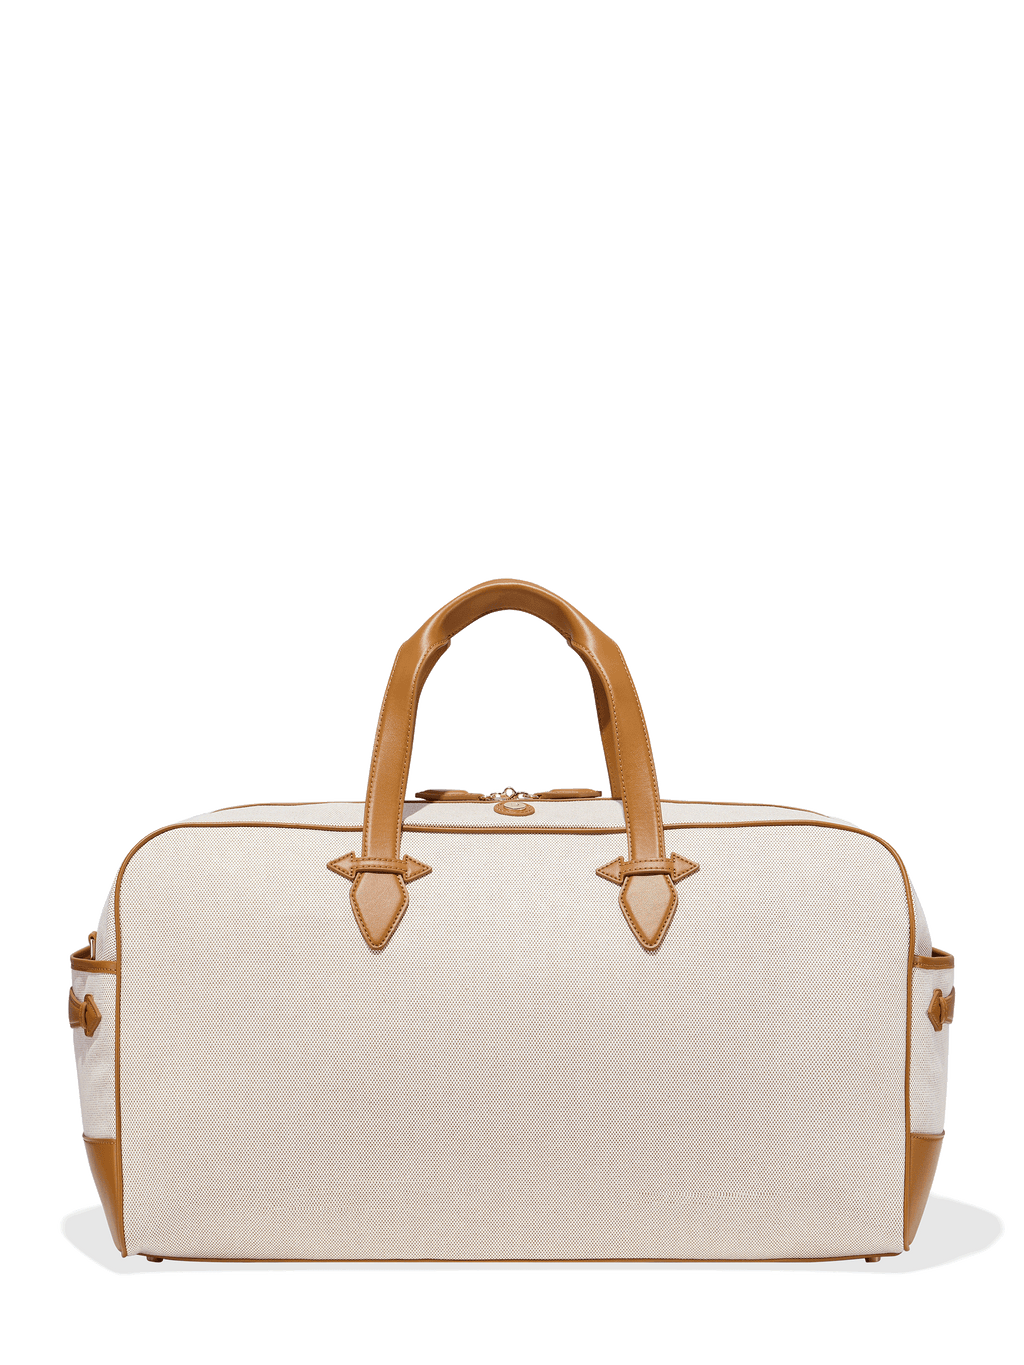 Products by Louis Vuitton: Meteor Travel Bag 50 in 2023